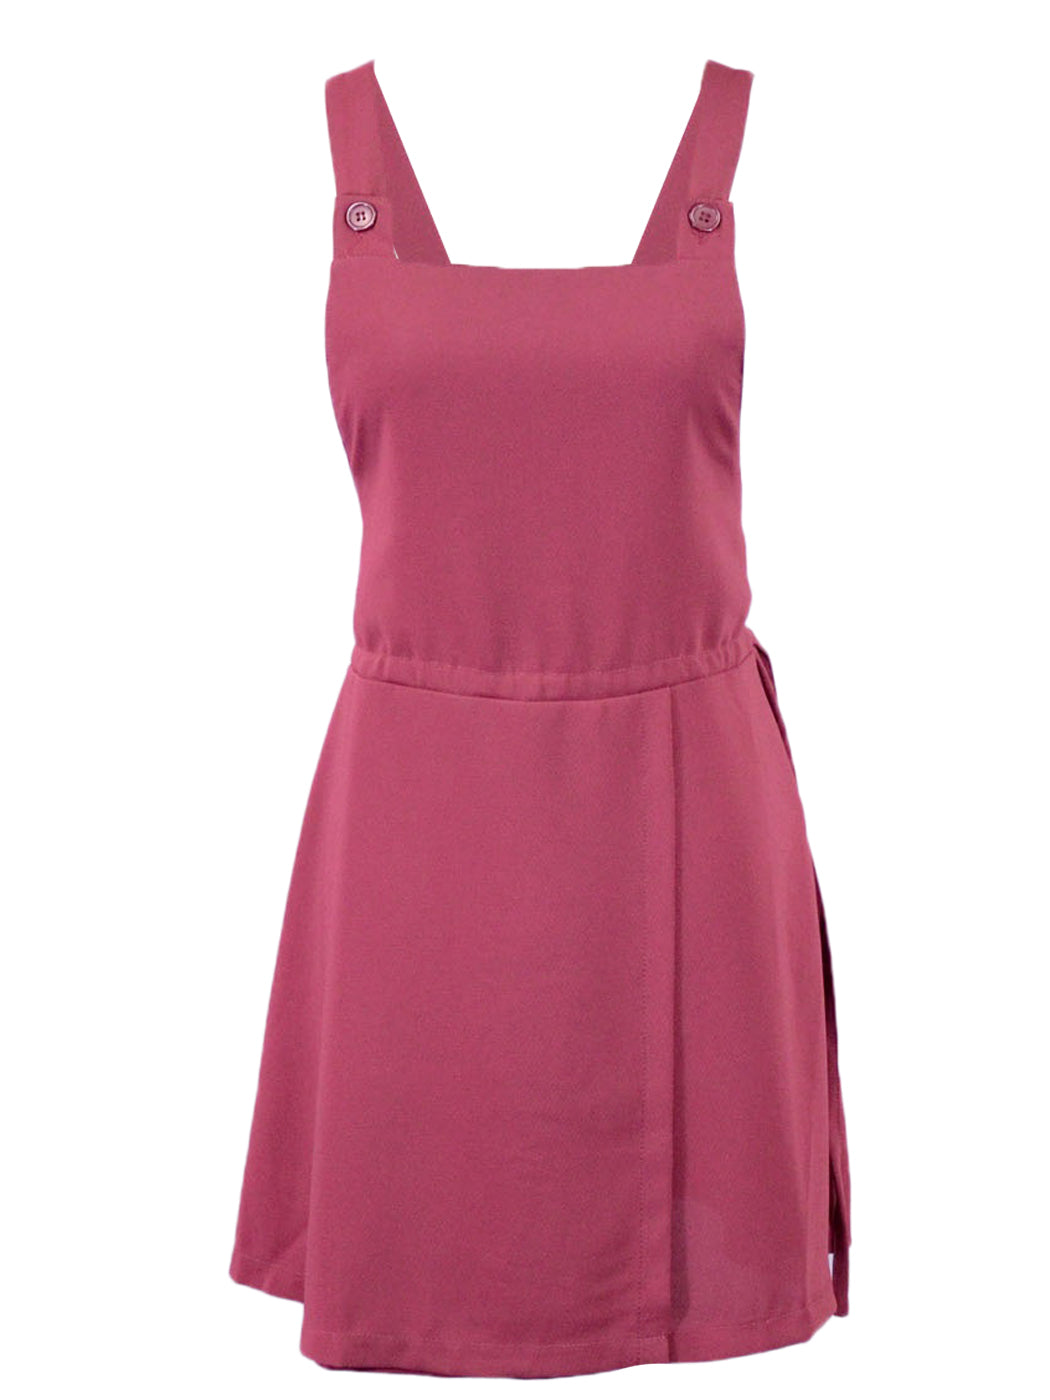 Cotton Candy Criss Cross Strap Wrap Over Button Overalls Skirt With Drawstring - ALILANG.COM